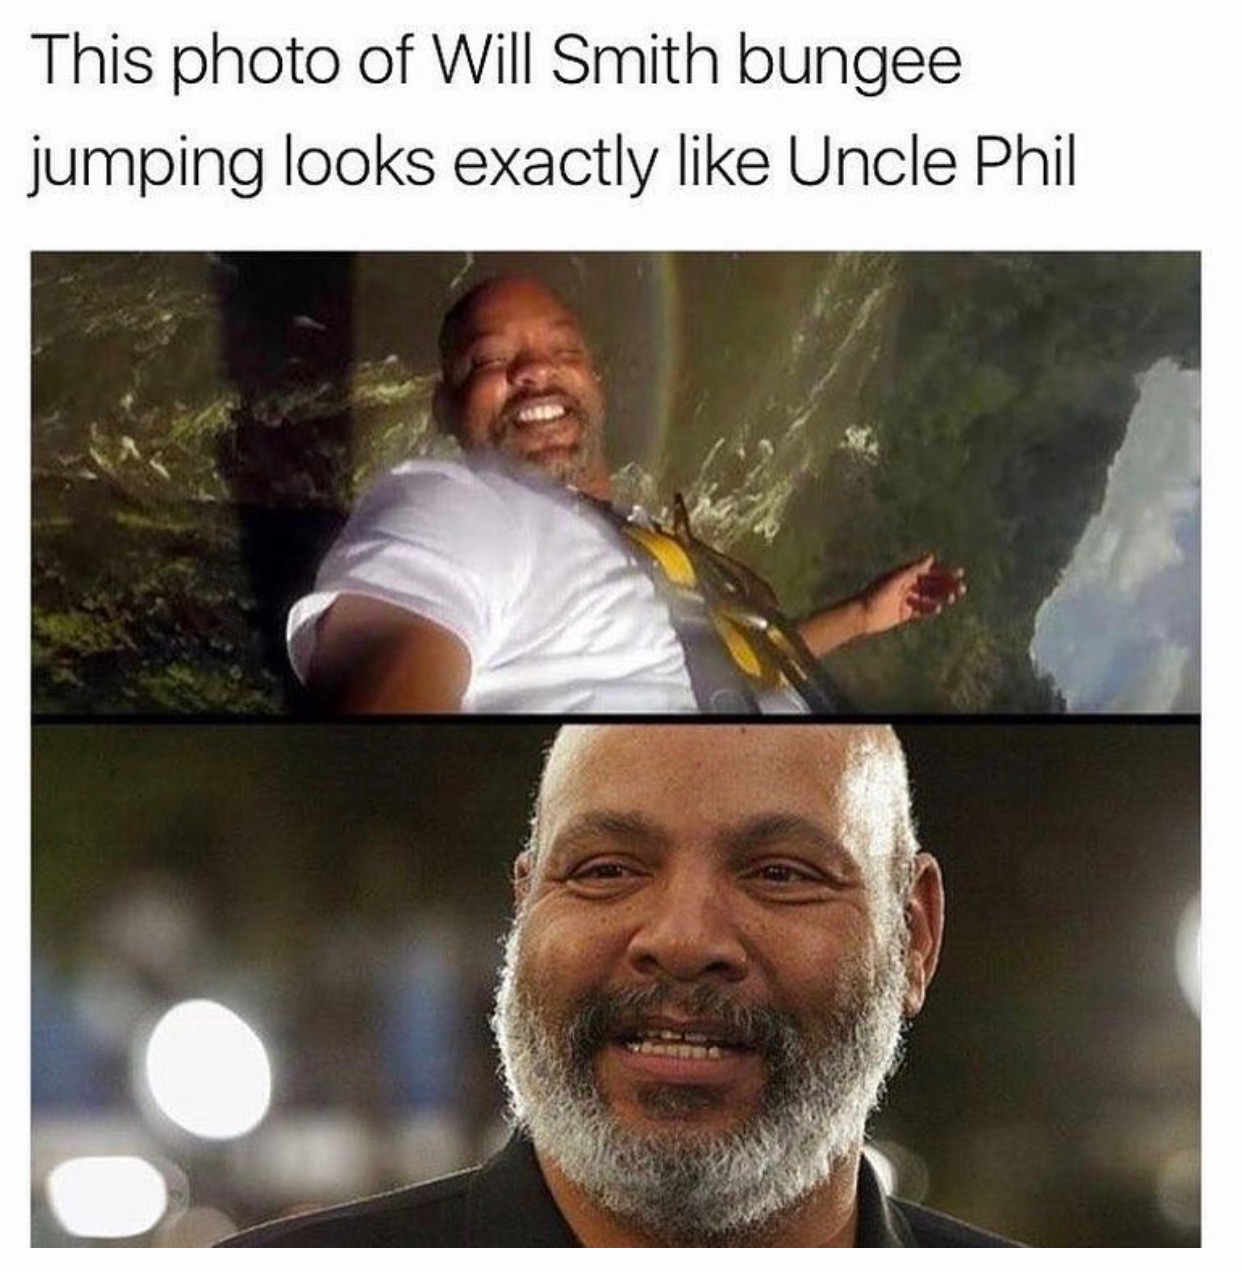 memes - will smith looking like uncle phil - This photo of Will Smith bungee jumping looks exactly Uncle Phil